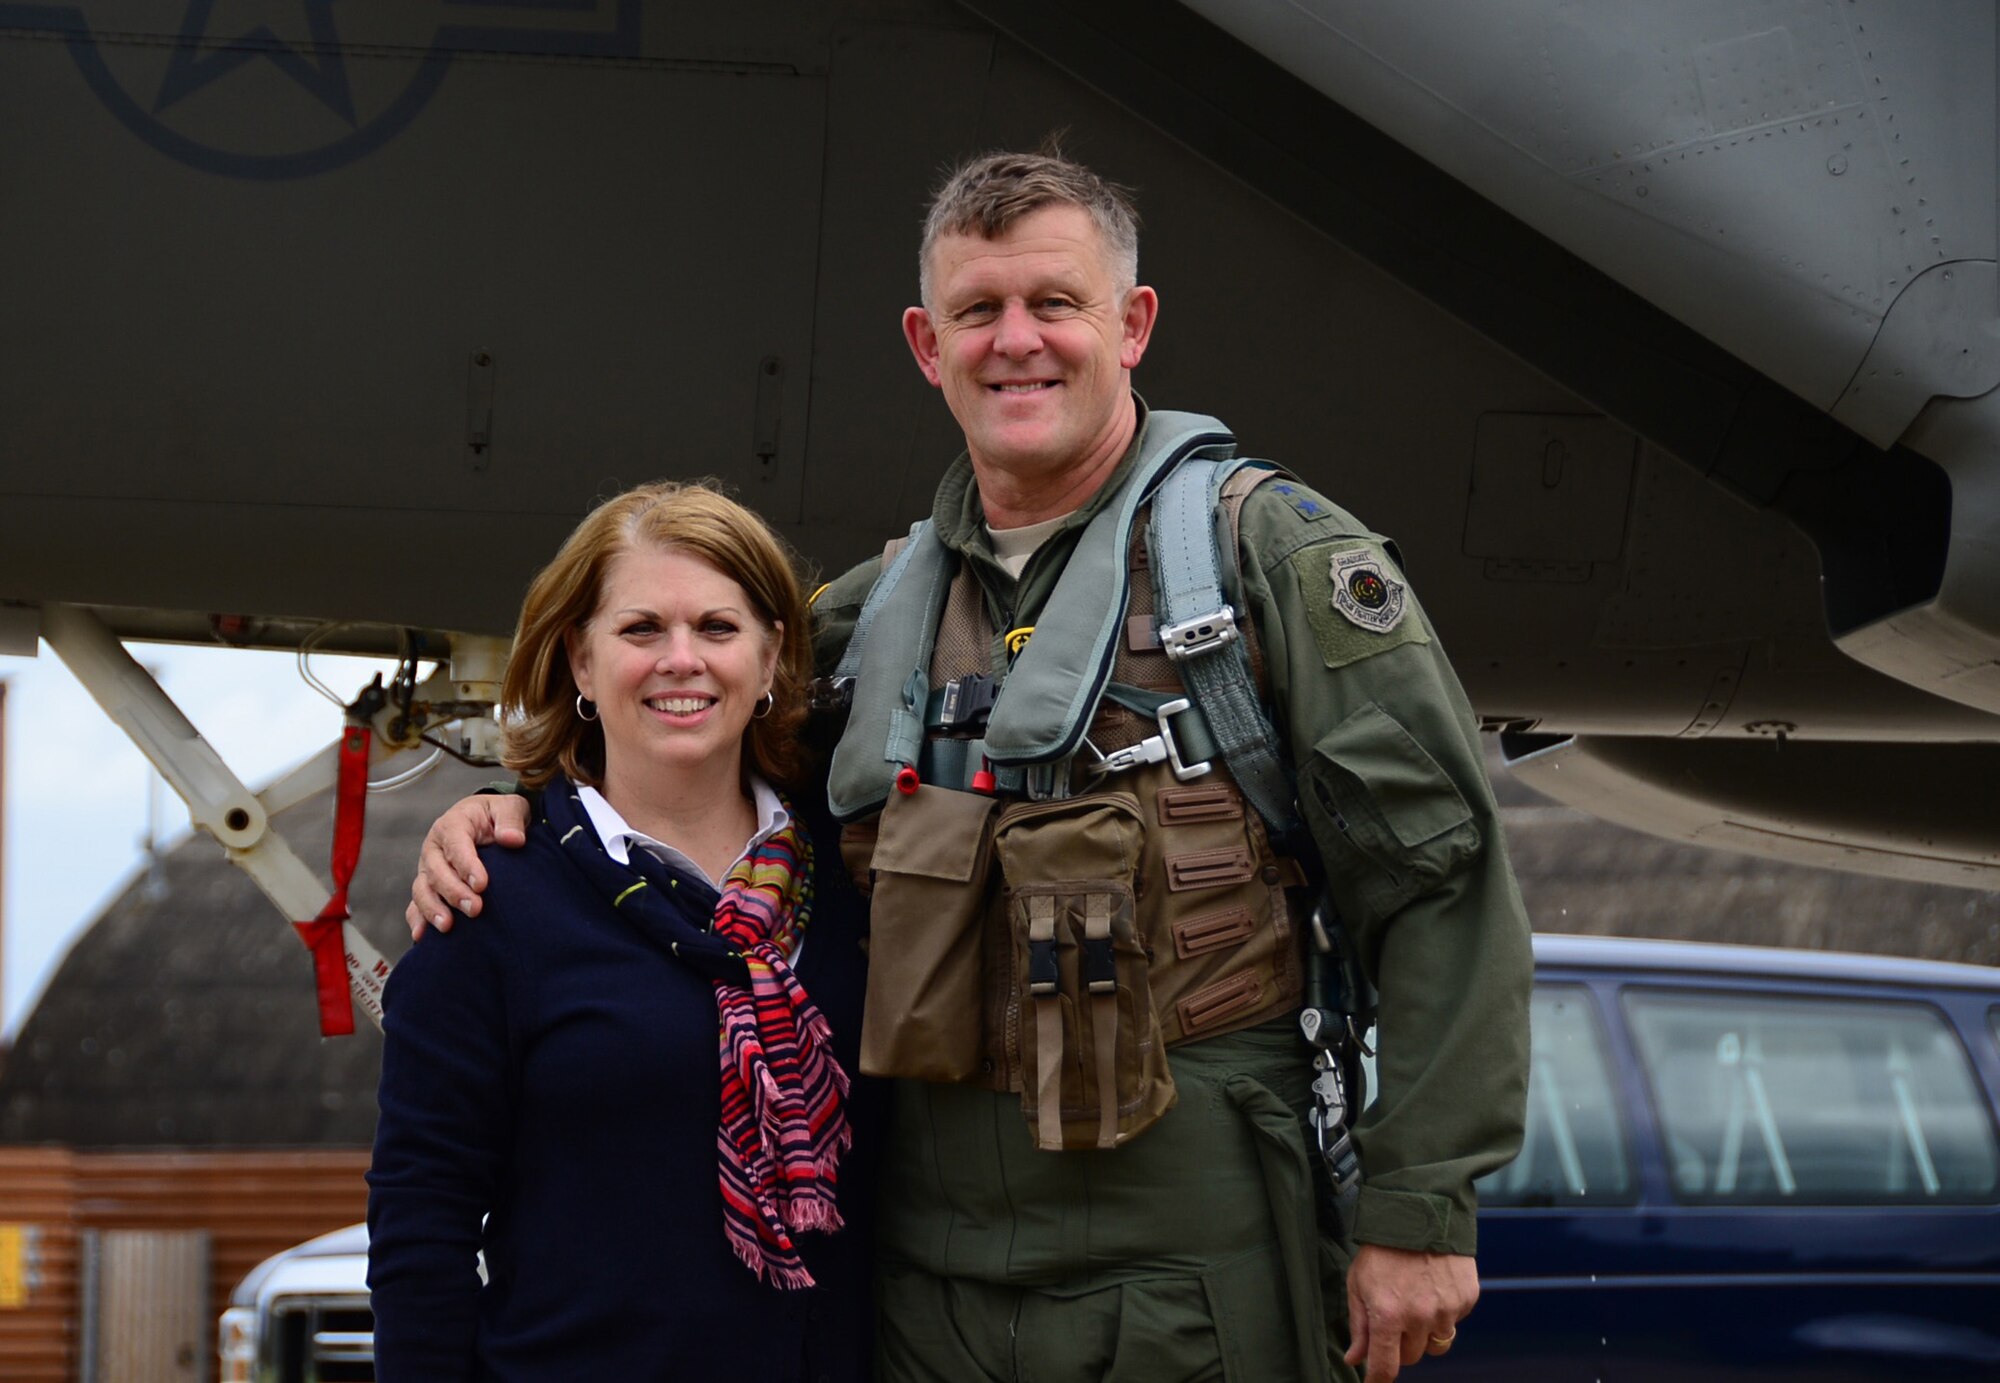 General Frank Gorenc and Mrs. Sharon Gorenc stand together in front of a F-15 at RAF Lakenheath, U.K., in August 2015. This week the general culminates a 37 1/2 year career when he relinquishes command Thursday of U.S. Air Forces in Europe, U.S. Air Forces Africa and NATO's
Allied Air Command. (Courtesy photo)